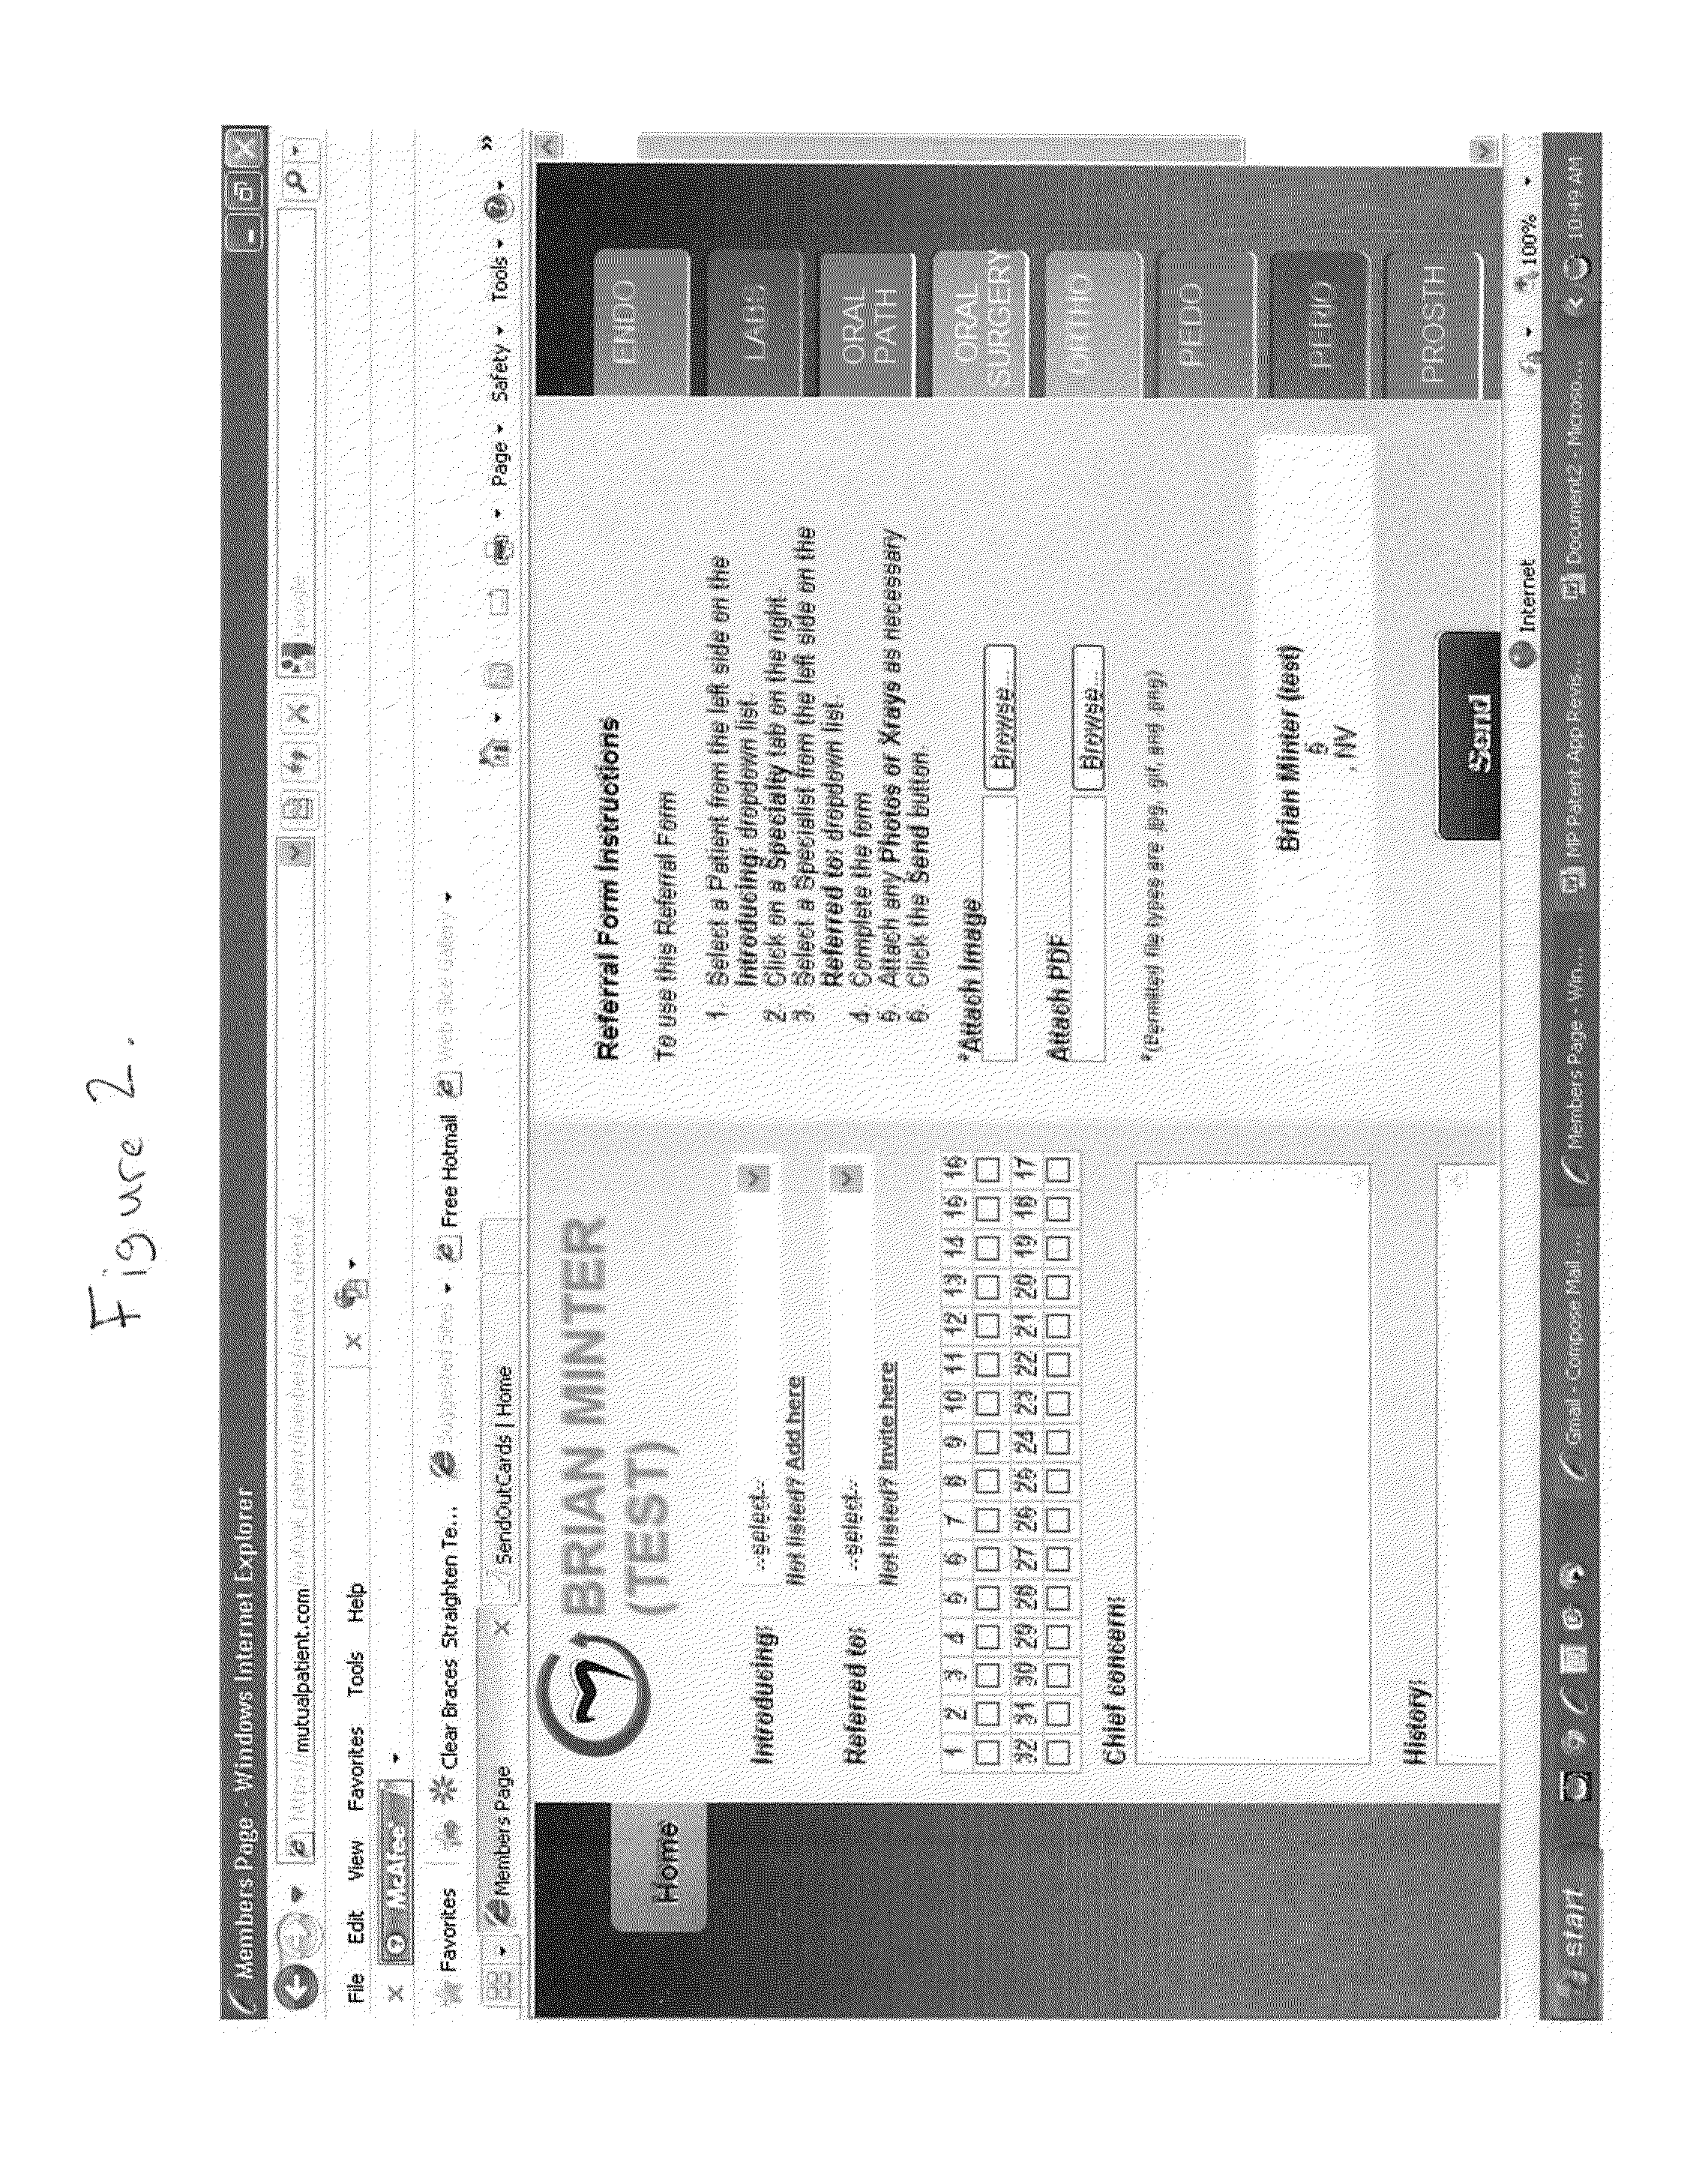 Web-based real-time patient tracking and referral management systems and methods